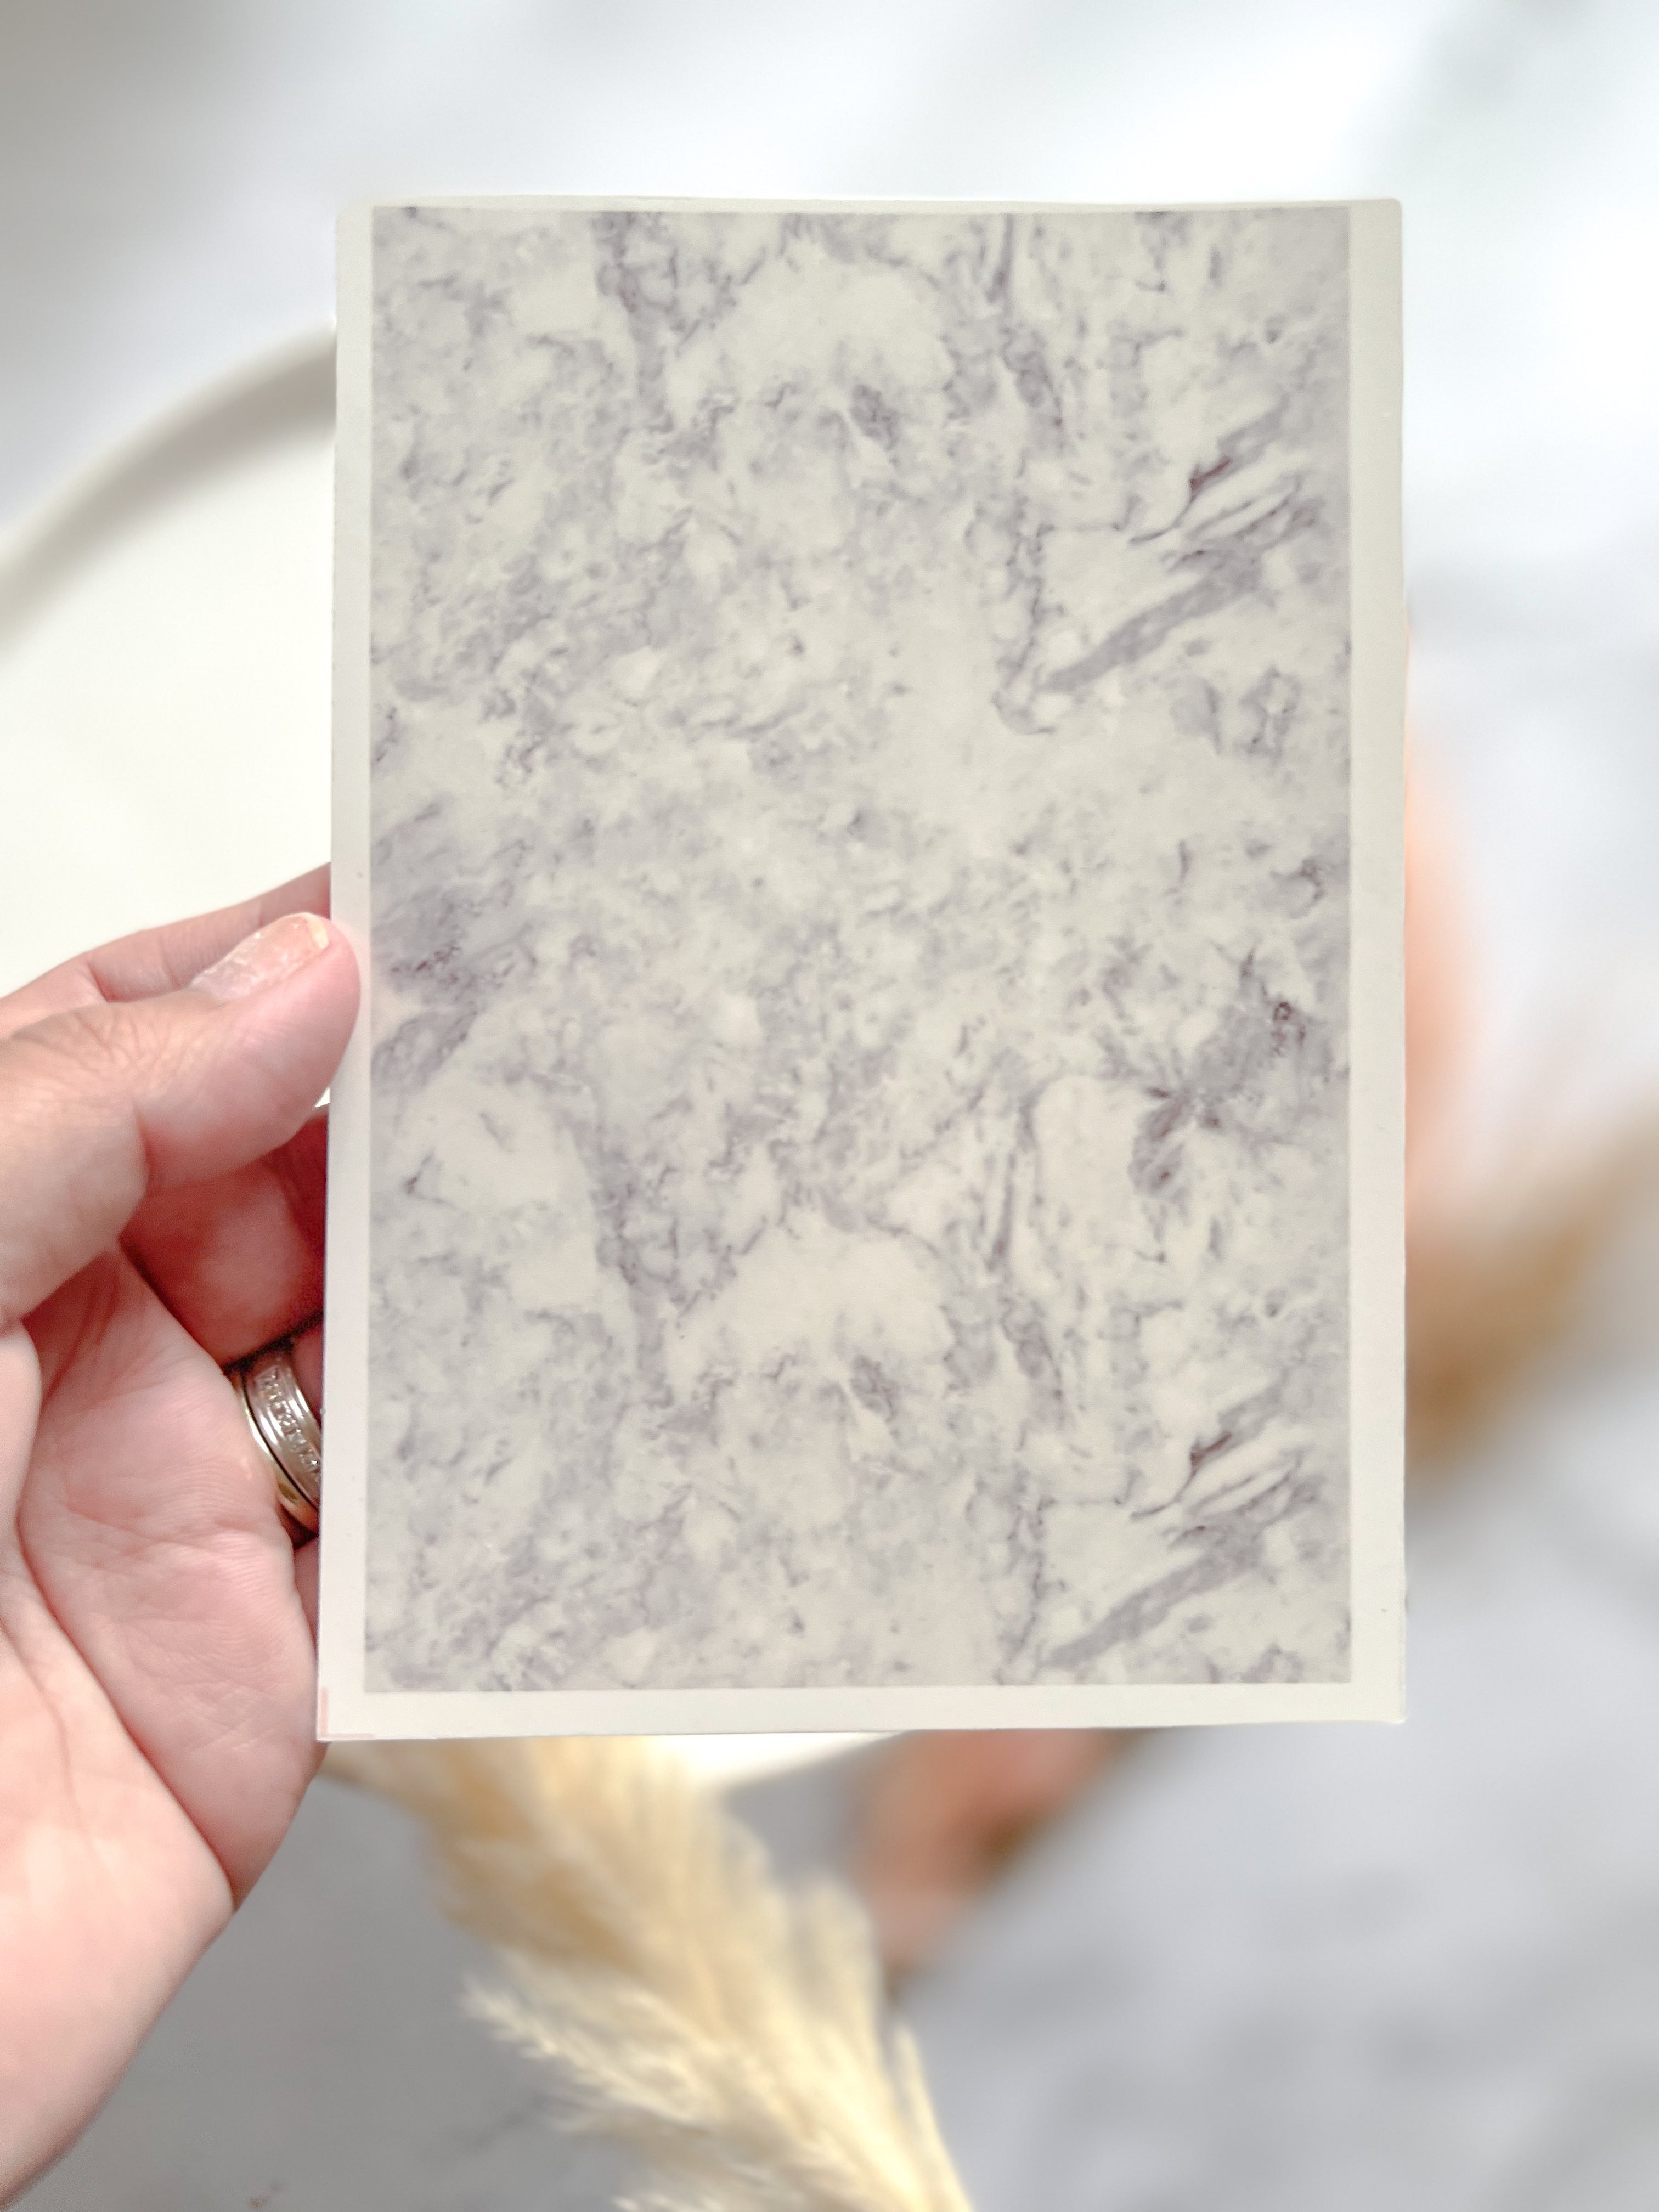 1 Sheet, Approx 13x90cm, Marble Print Water Decal Image Transfer for Polymer Clay / Ceramics